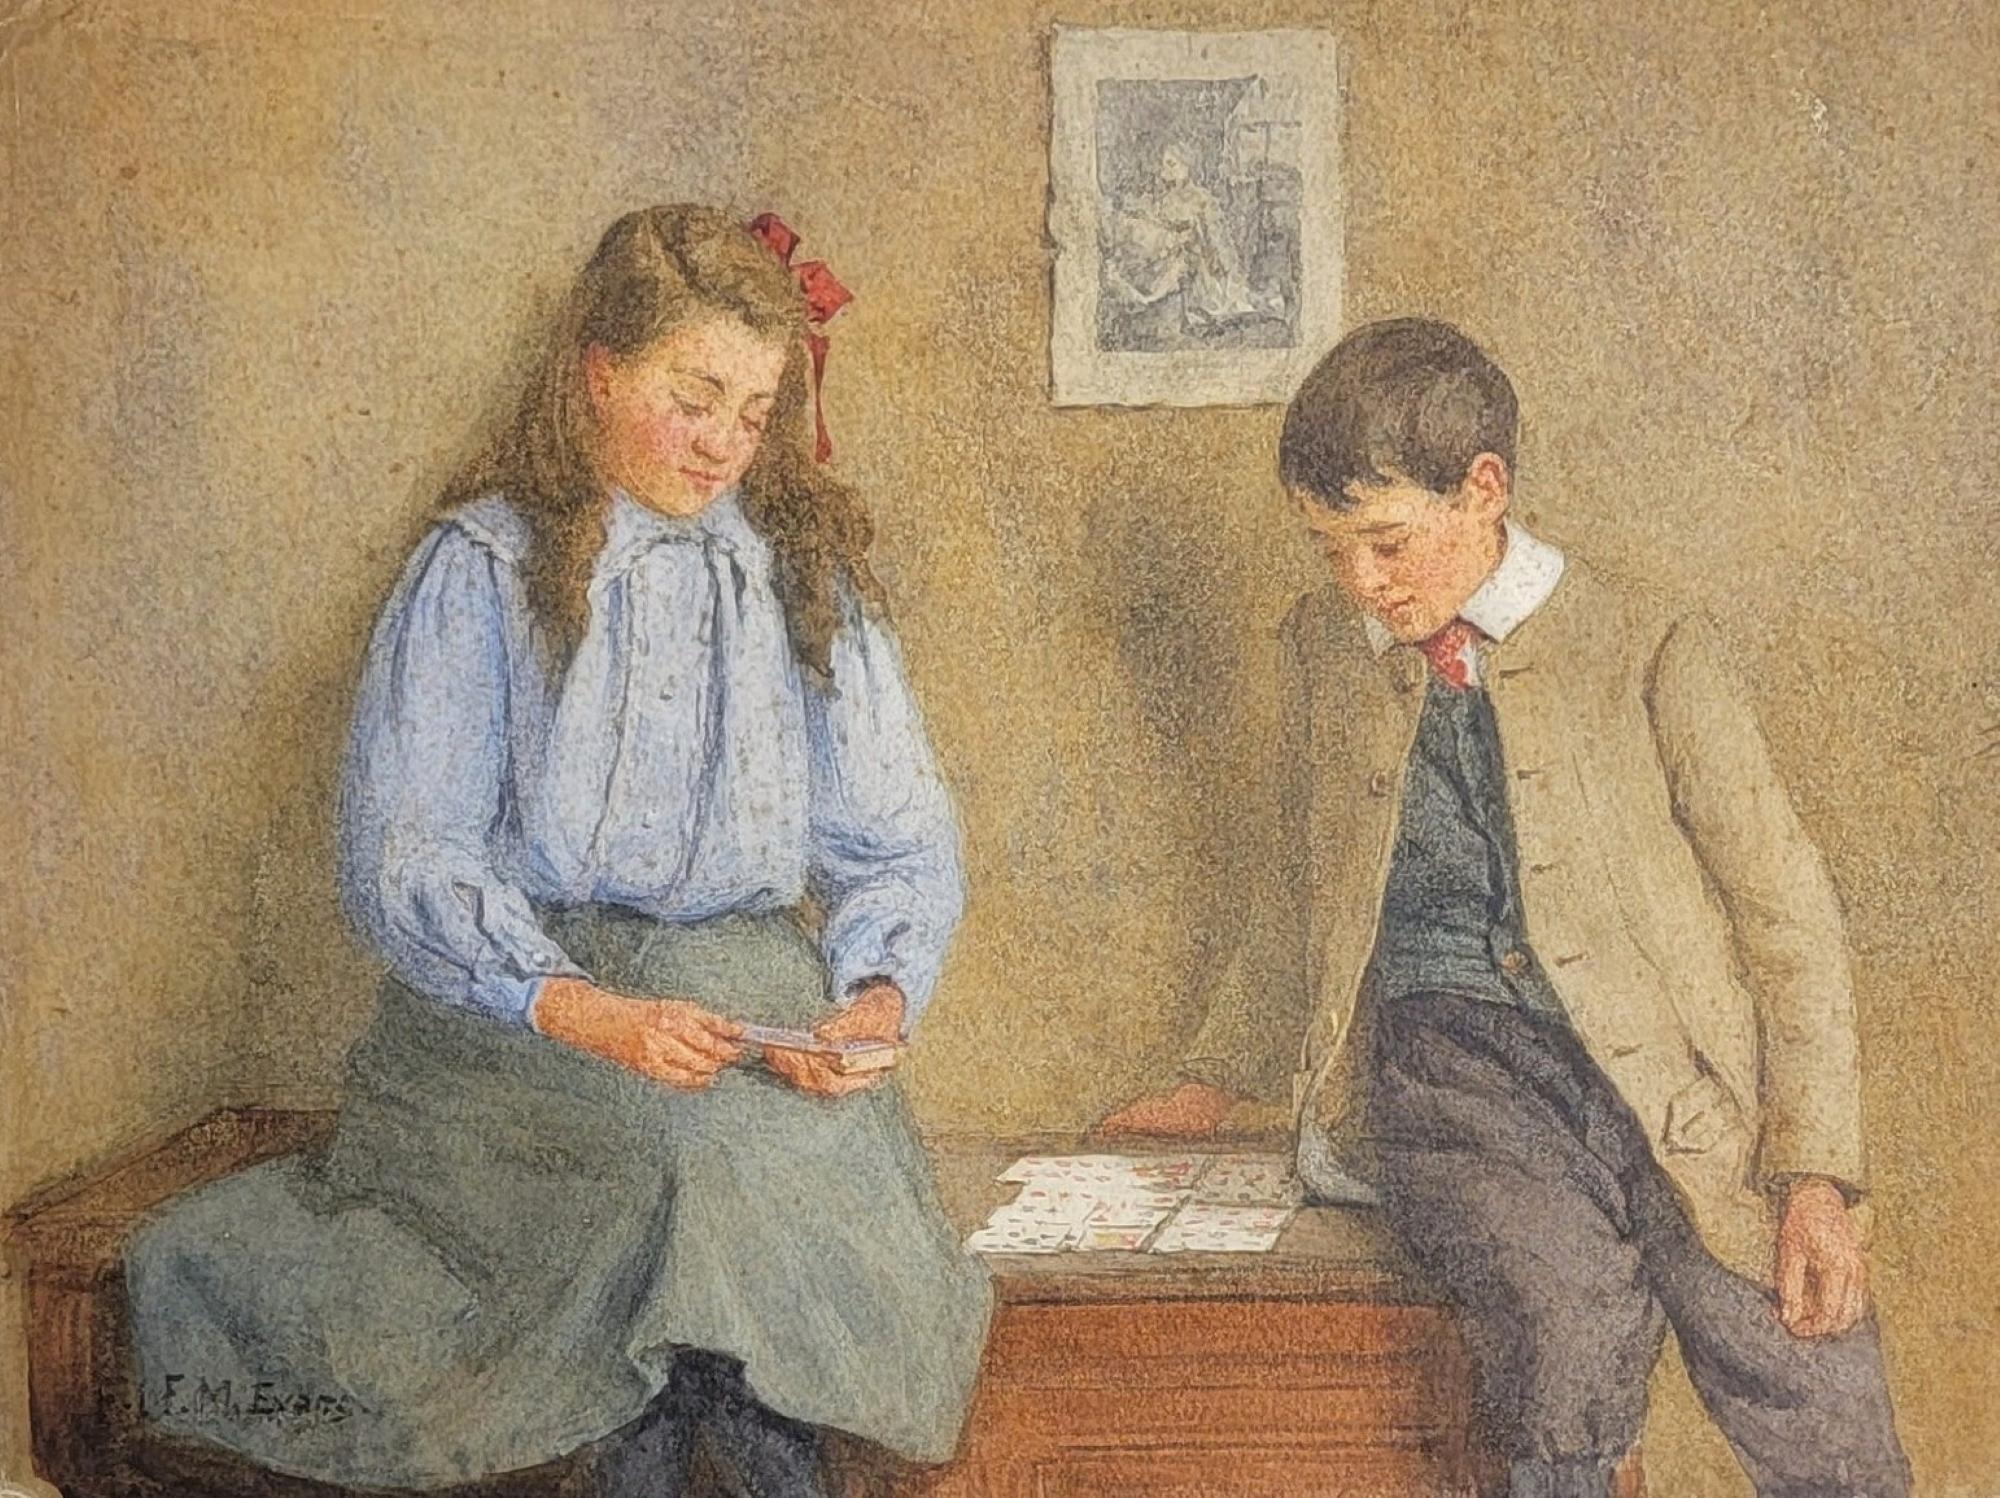 Frederick McNamara Evans (English, 1859-1929)
Signed: F.M. Evans (Lower, Left)

" A Game of Patience ", circa 1900
(Titled in pencil on verso and original label.)

Watercolor on paper laid on paper

Size: 10 3/4" x 14 1/8"

Outside Matt Size: 17" x